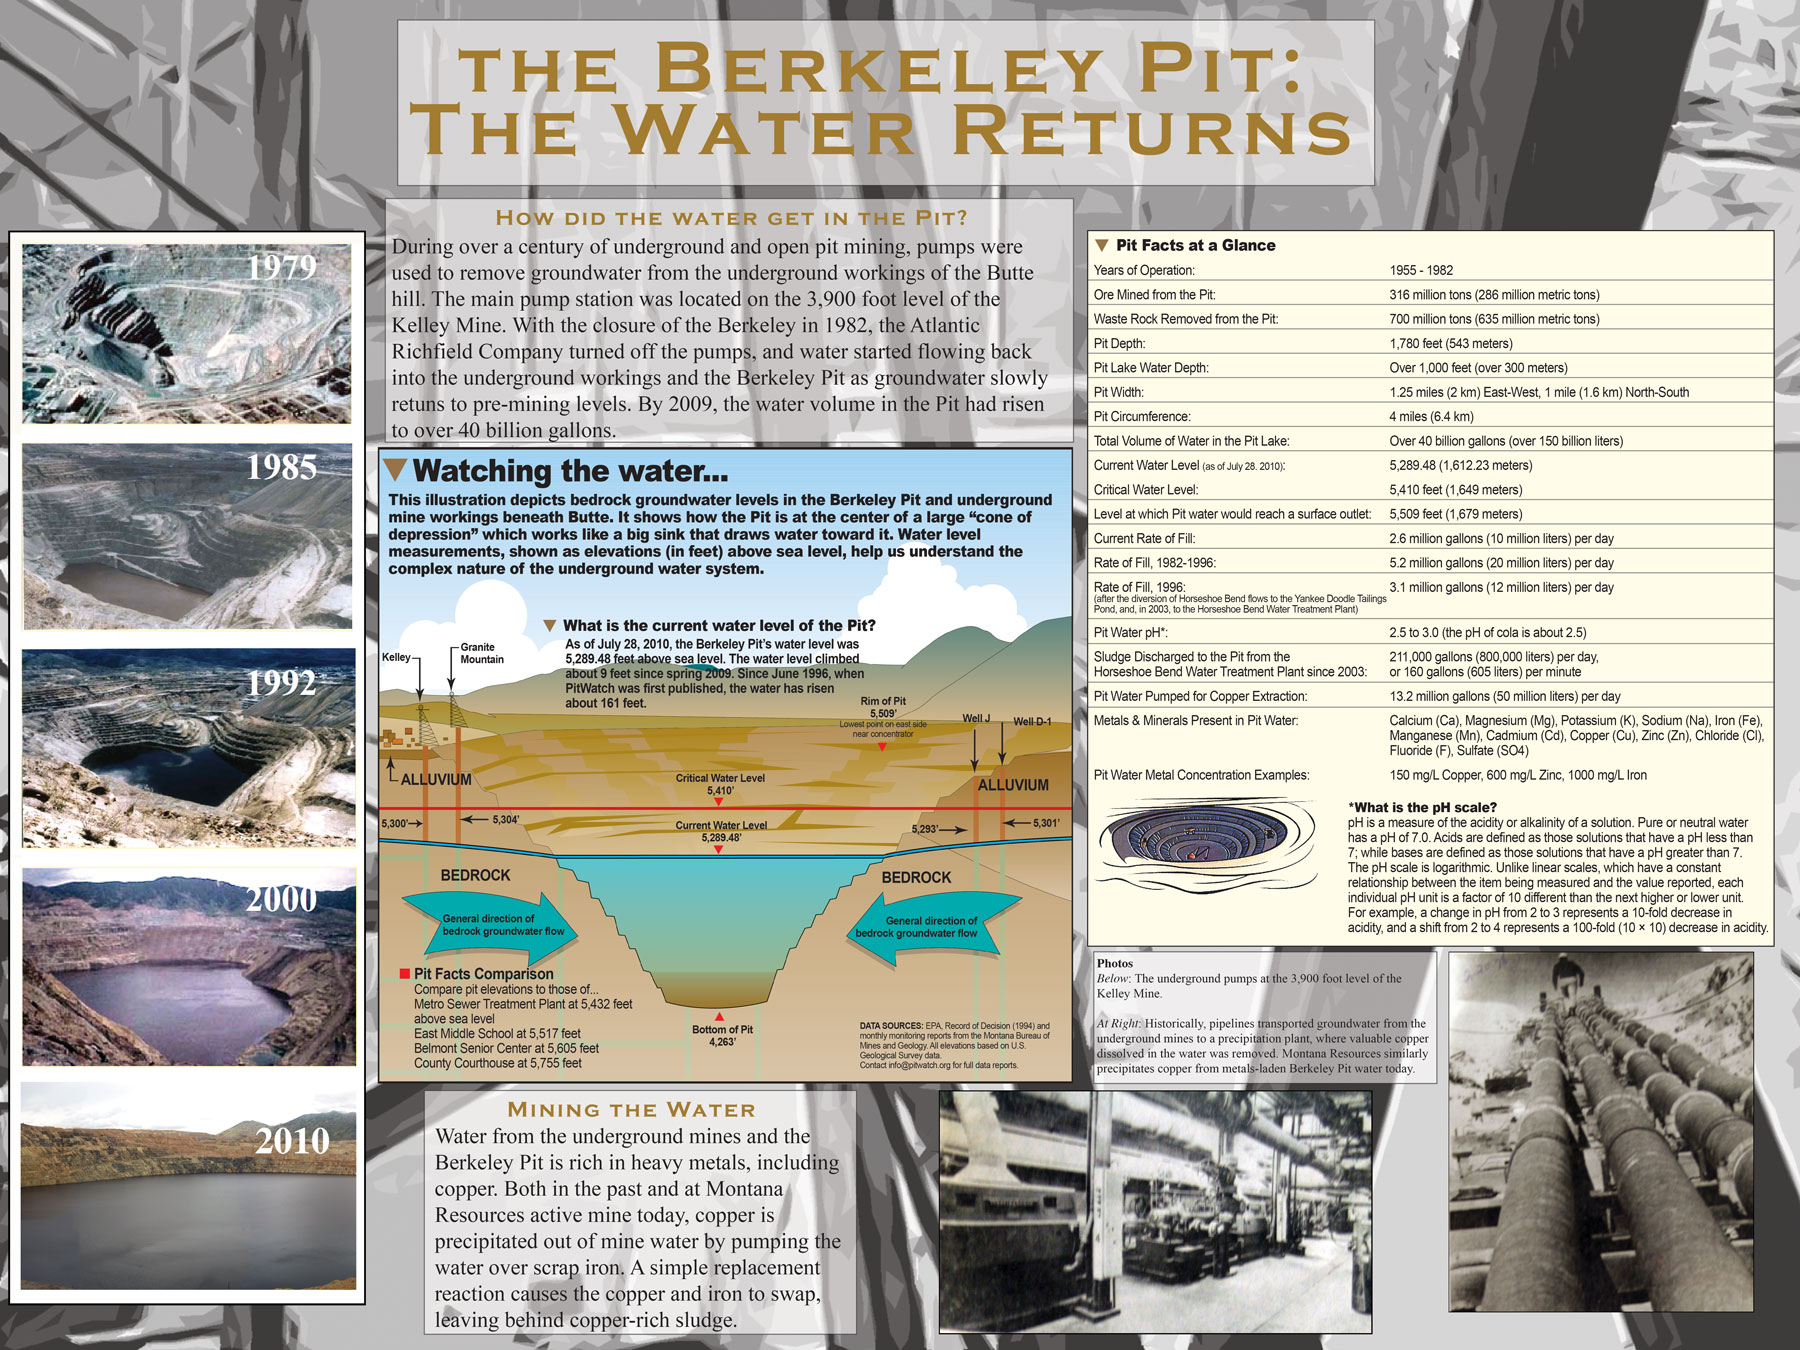 Berkeley Pit Poster Series: The Water Returns. Click on the image to view a larger version, or use the links at the bottom of the page to download a high-resolution version.